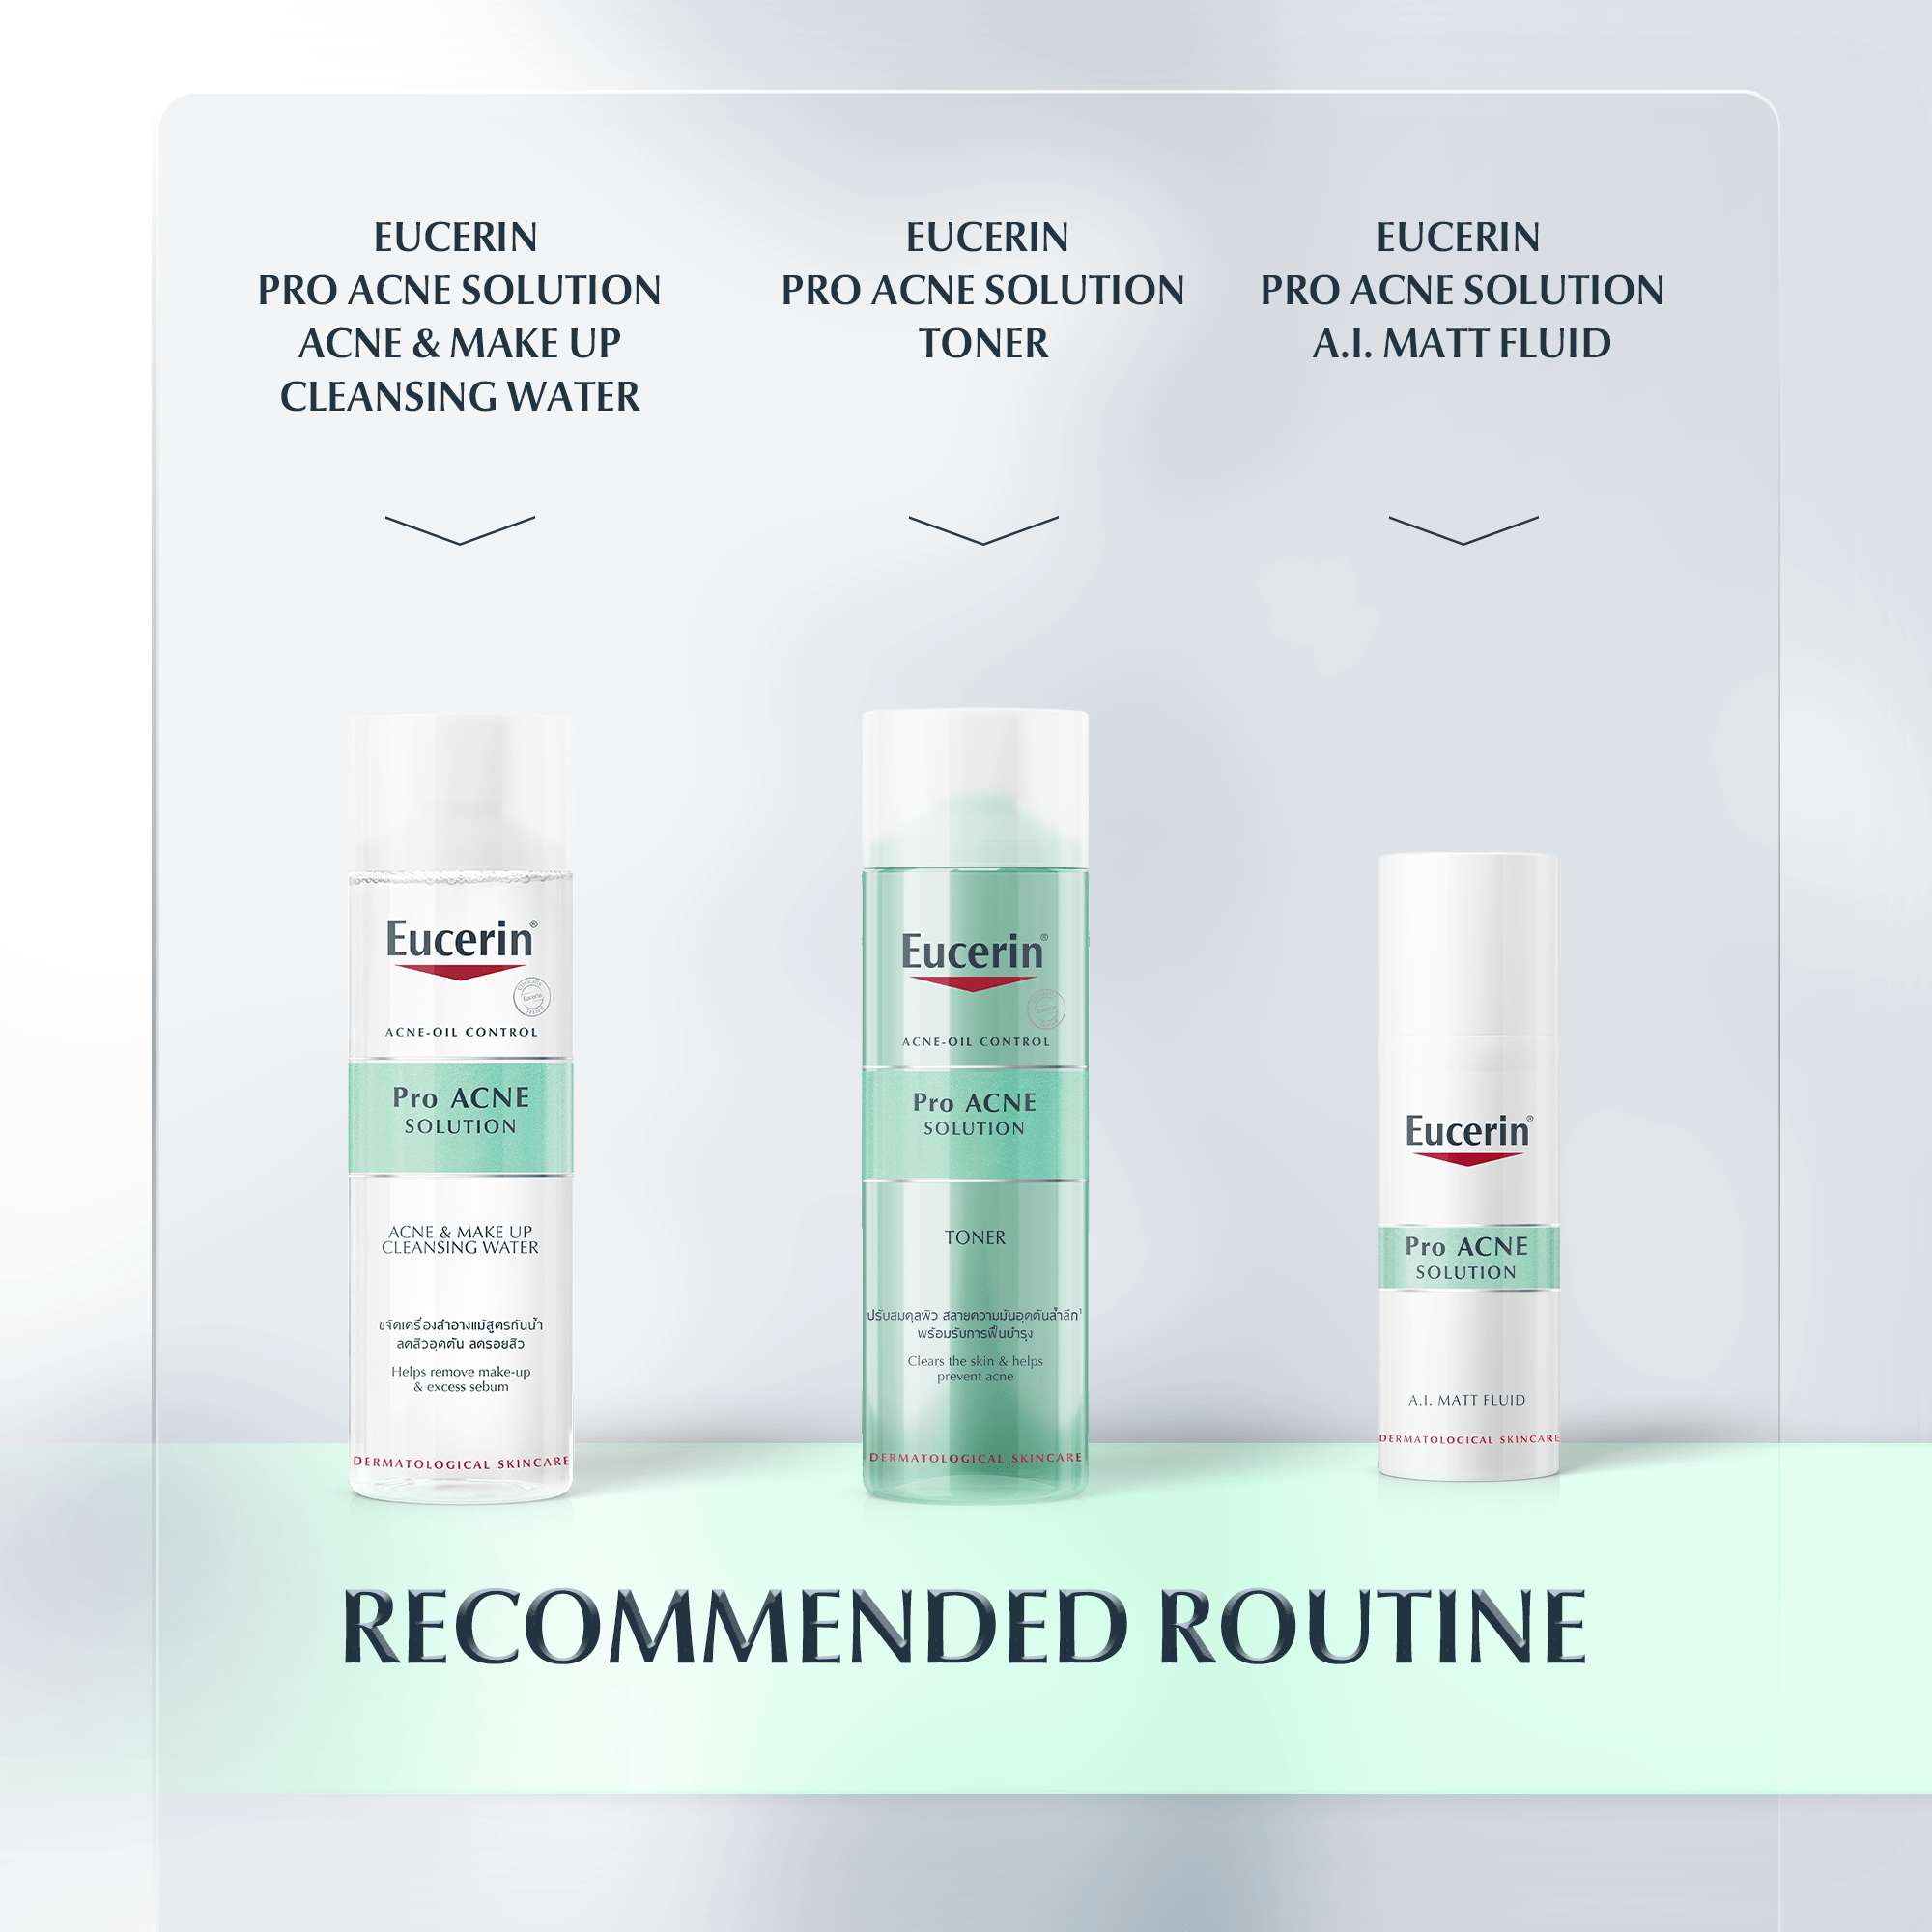 Recommended Proacne Solution range